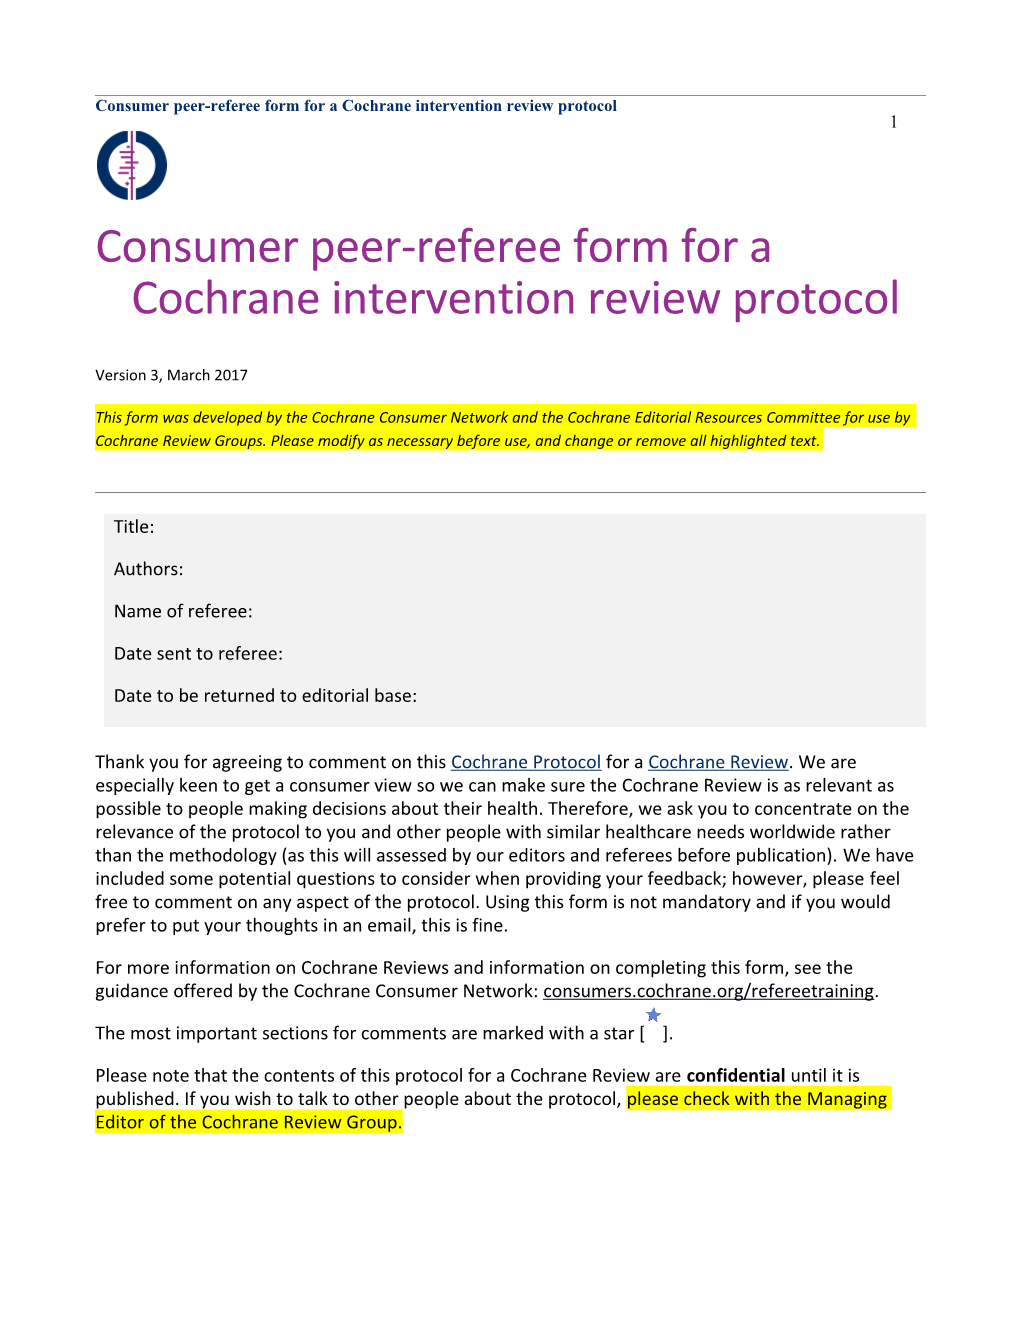 Consumer Peer-Referee Form for a Cochrane Intervention Review Protocol